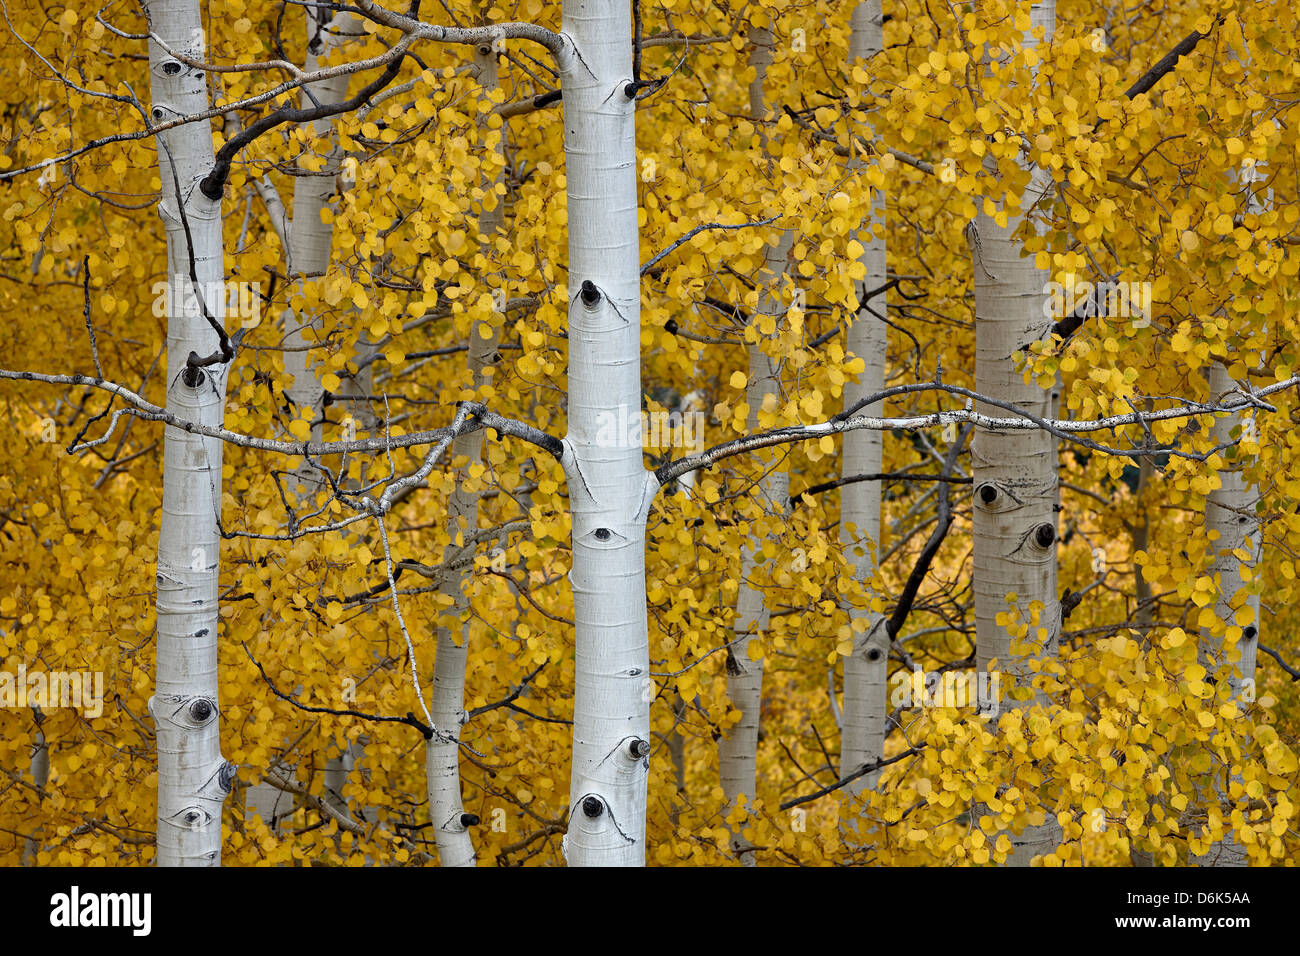 Aspen trunks among yellow leaves, Uncompahgre National Forest, Colorado, United States of America, North America Stock Photo